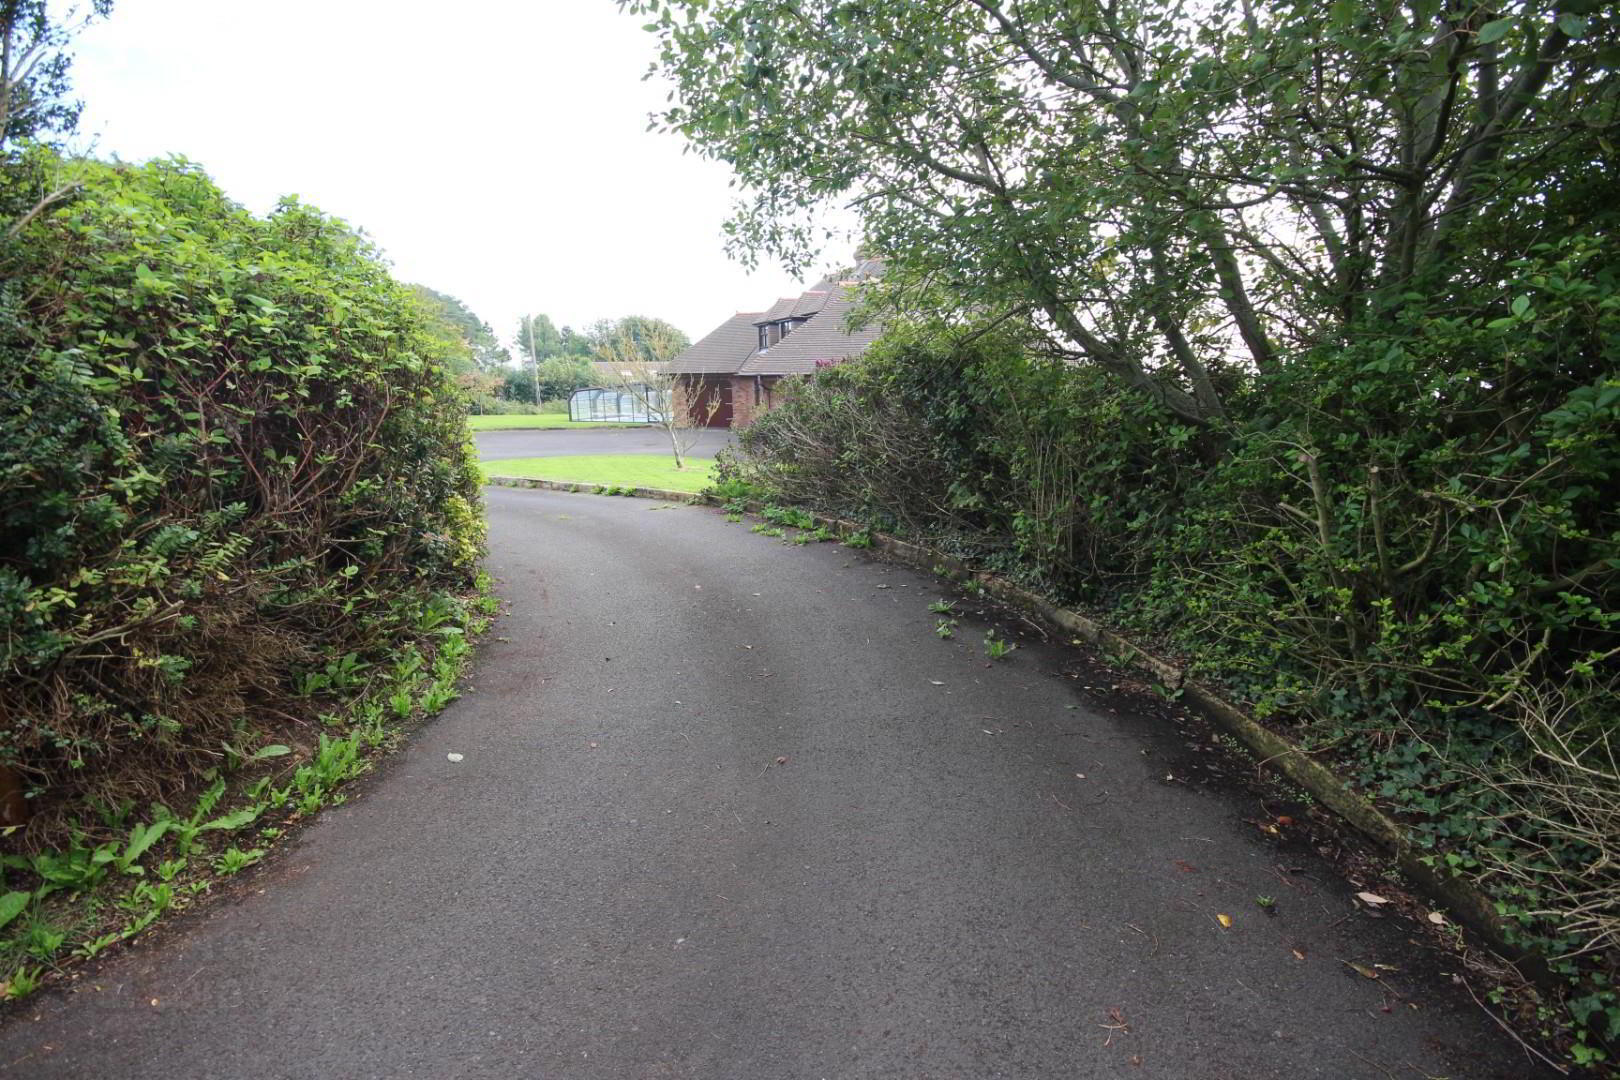 70 Raw Brae Road ( With, C.2 Acre Adjoining Field)